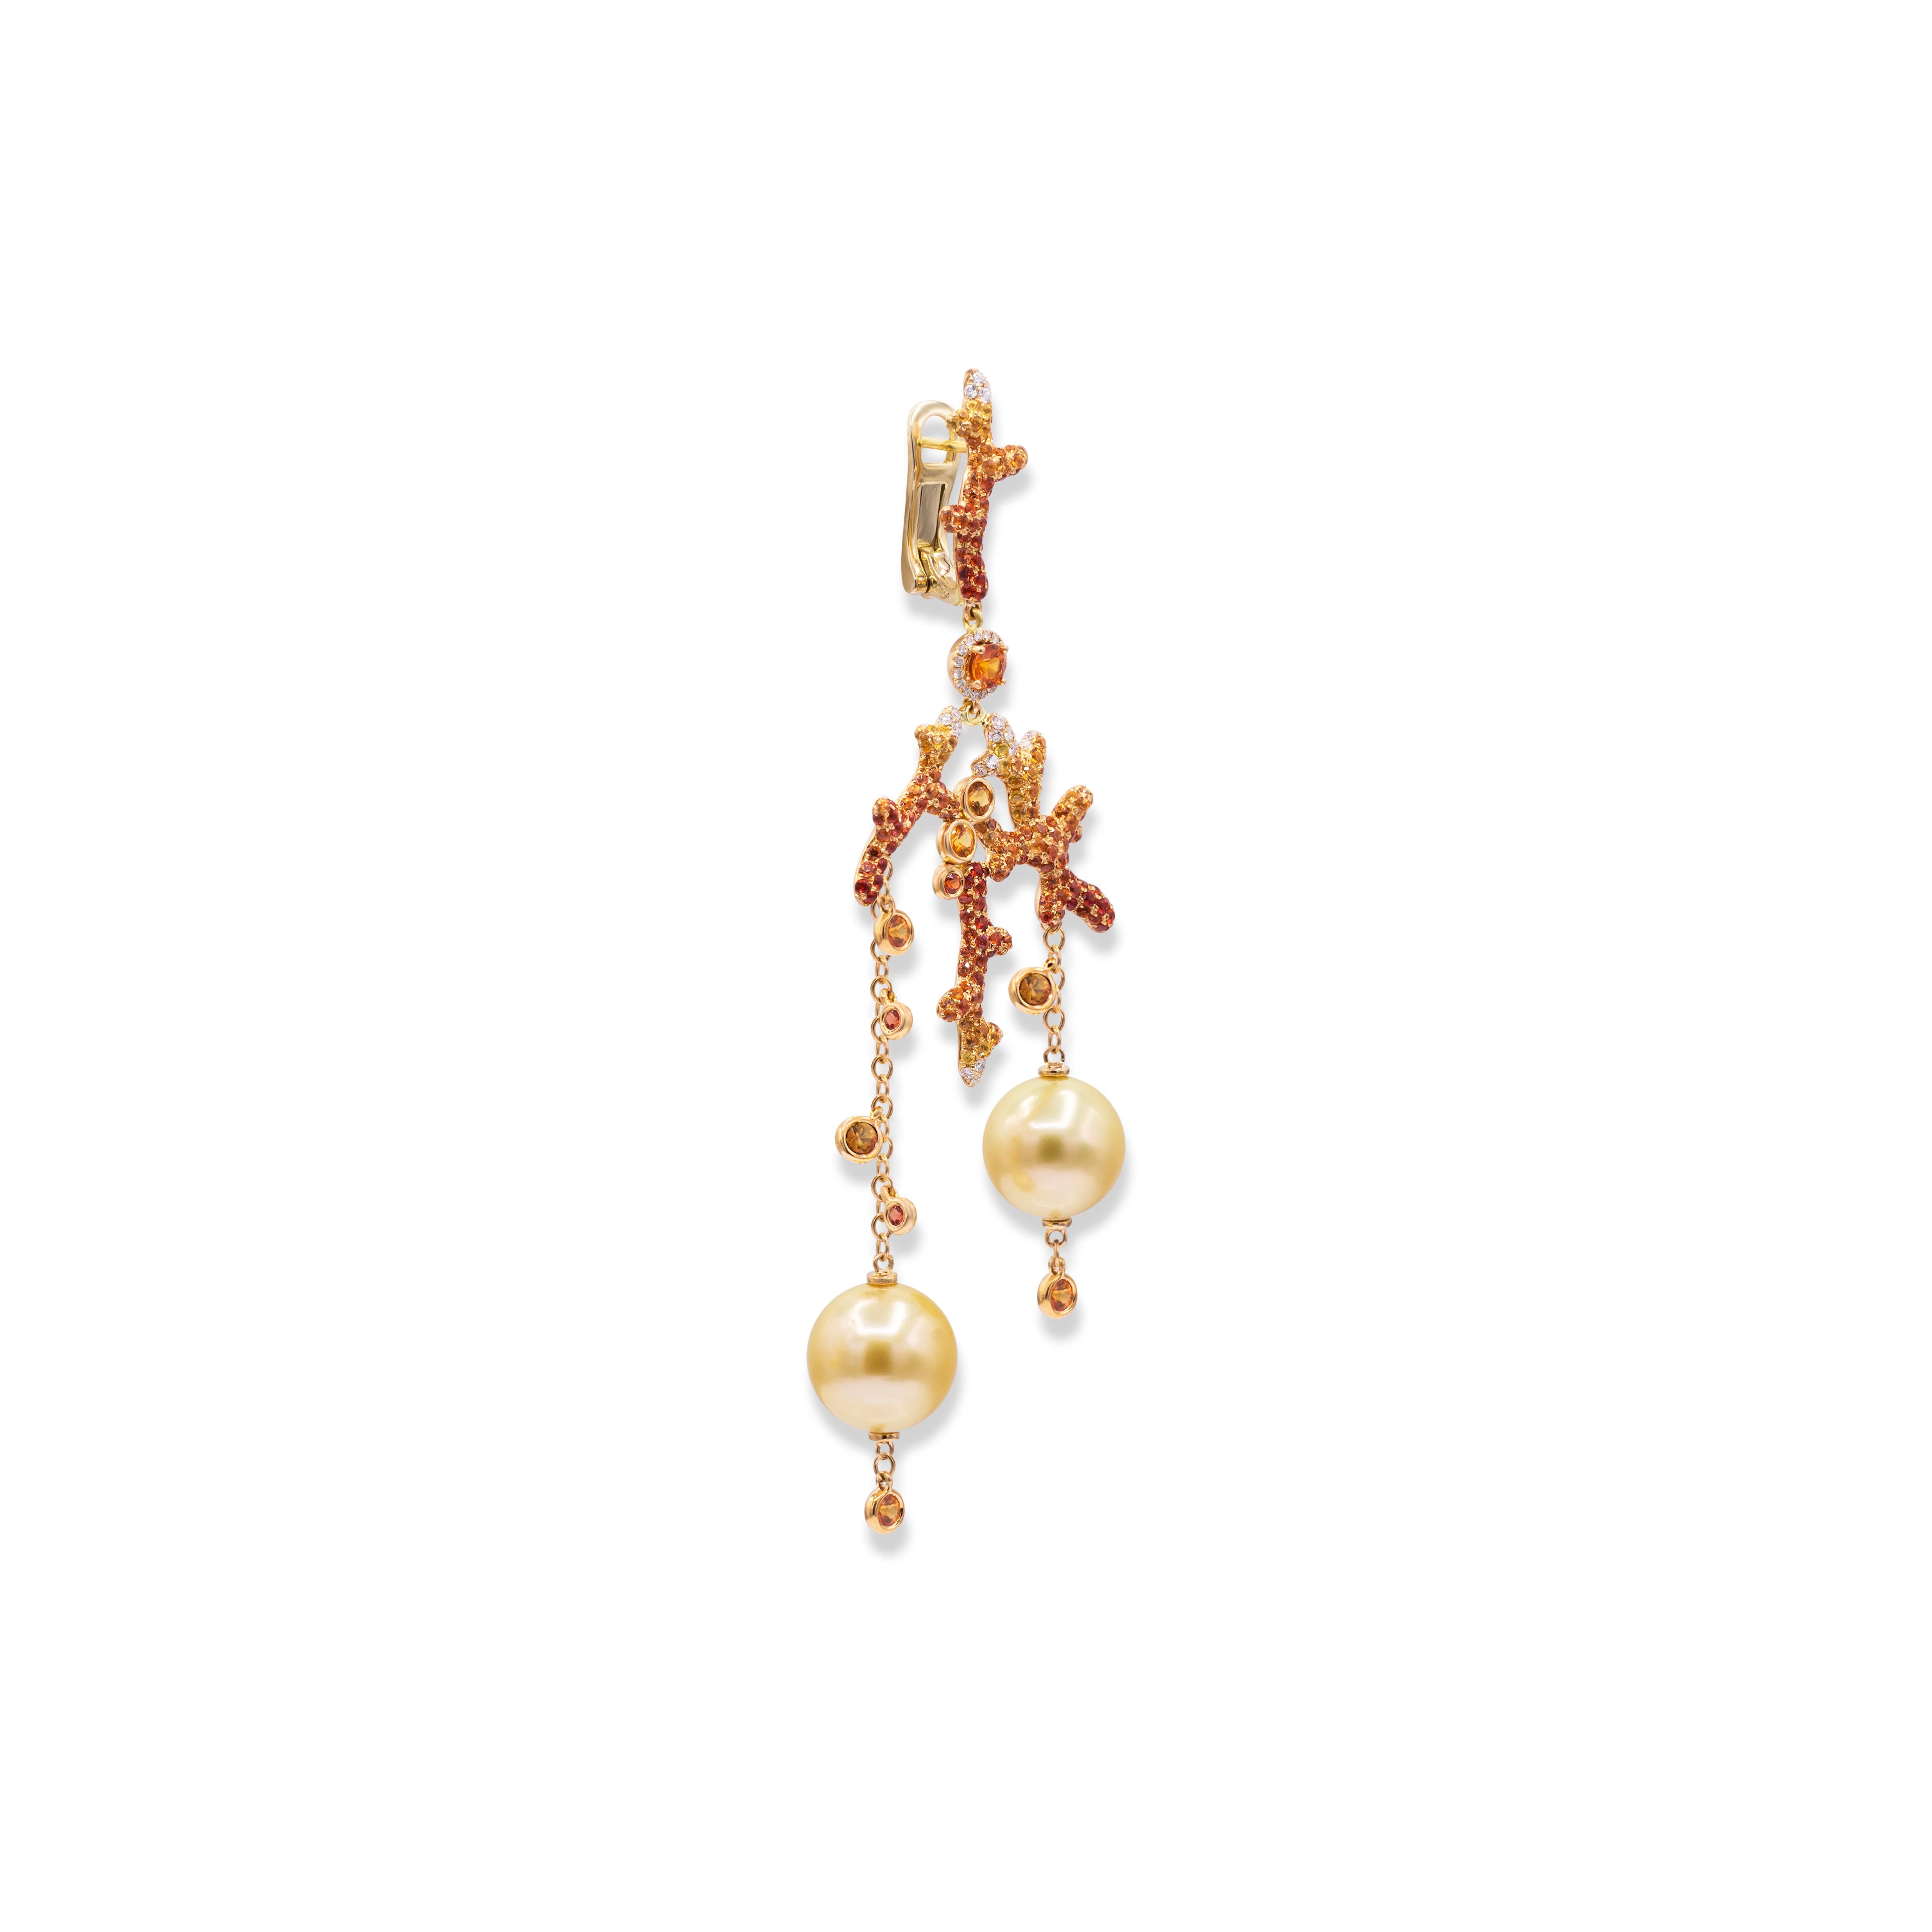 White Diamonds 0.51 cts - Yellow and Orange Sapphires 4.7 cts - Gold South Sea Pearls 4 pieces (from 11.5 to 11.75mm).                                                                                                                                   